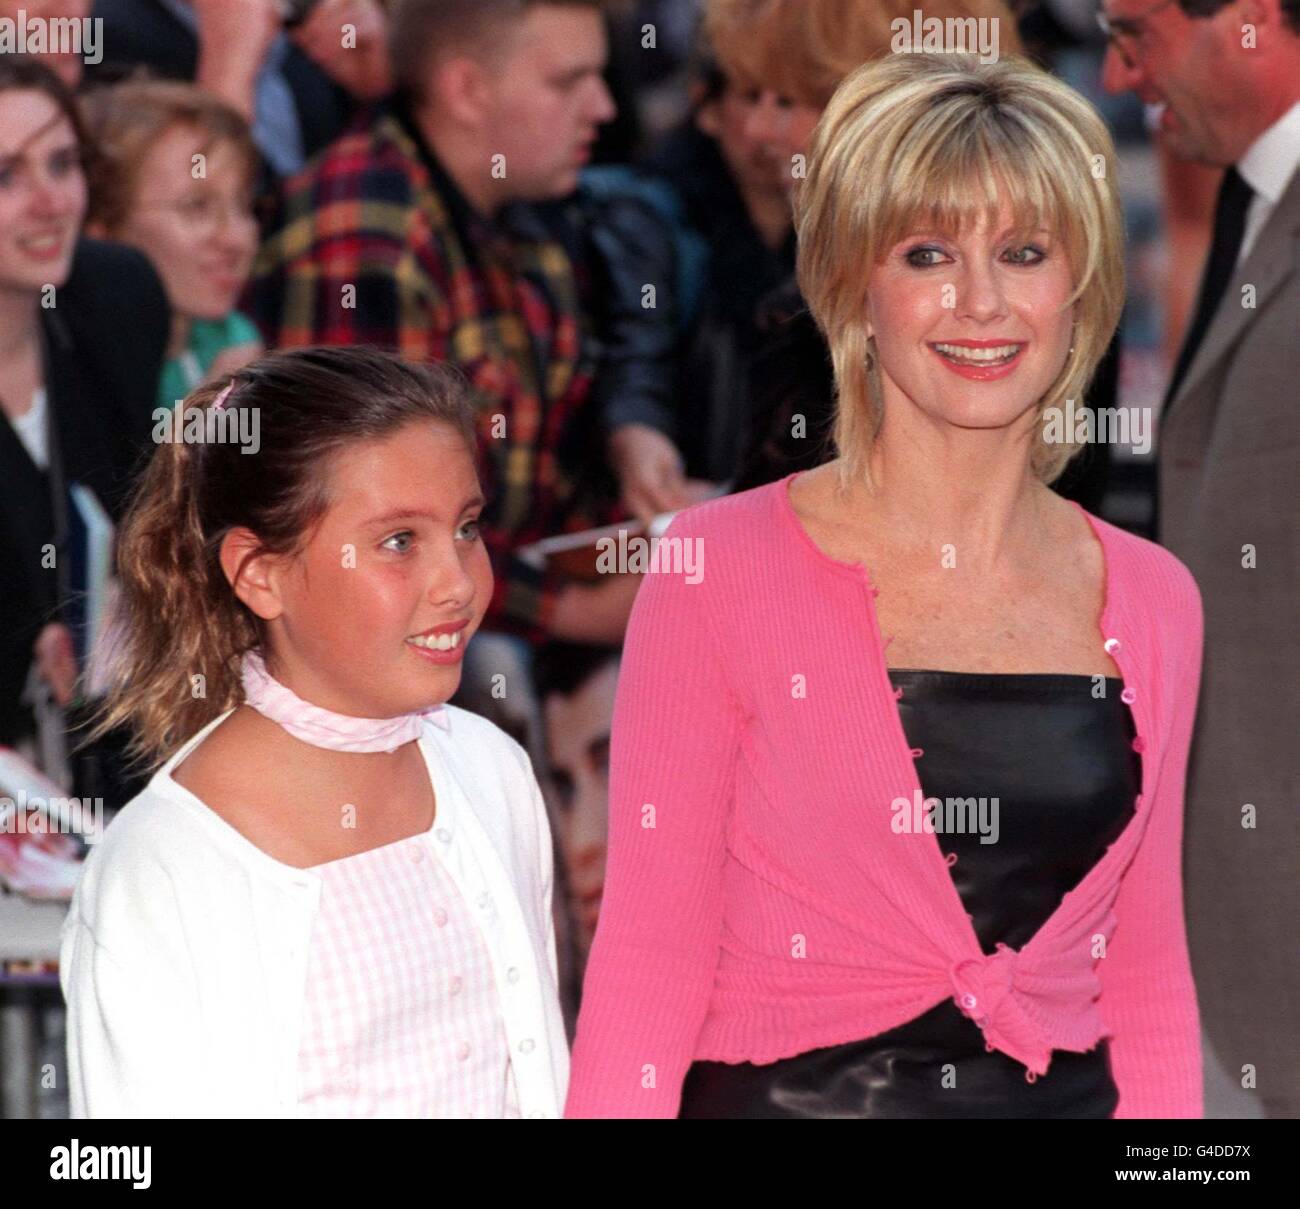 Olivia Newton-John arrives with her daughter Chloe, for the premiere of the 20th anniversary re-issue of the musical Grease, at the Empire, Leicester Square. Stock Photo